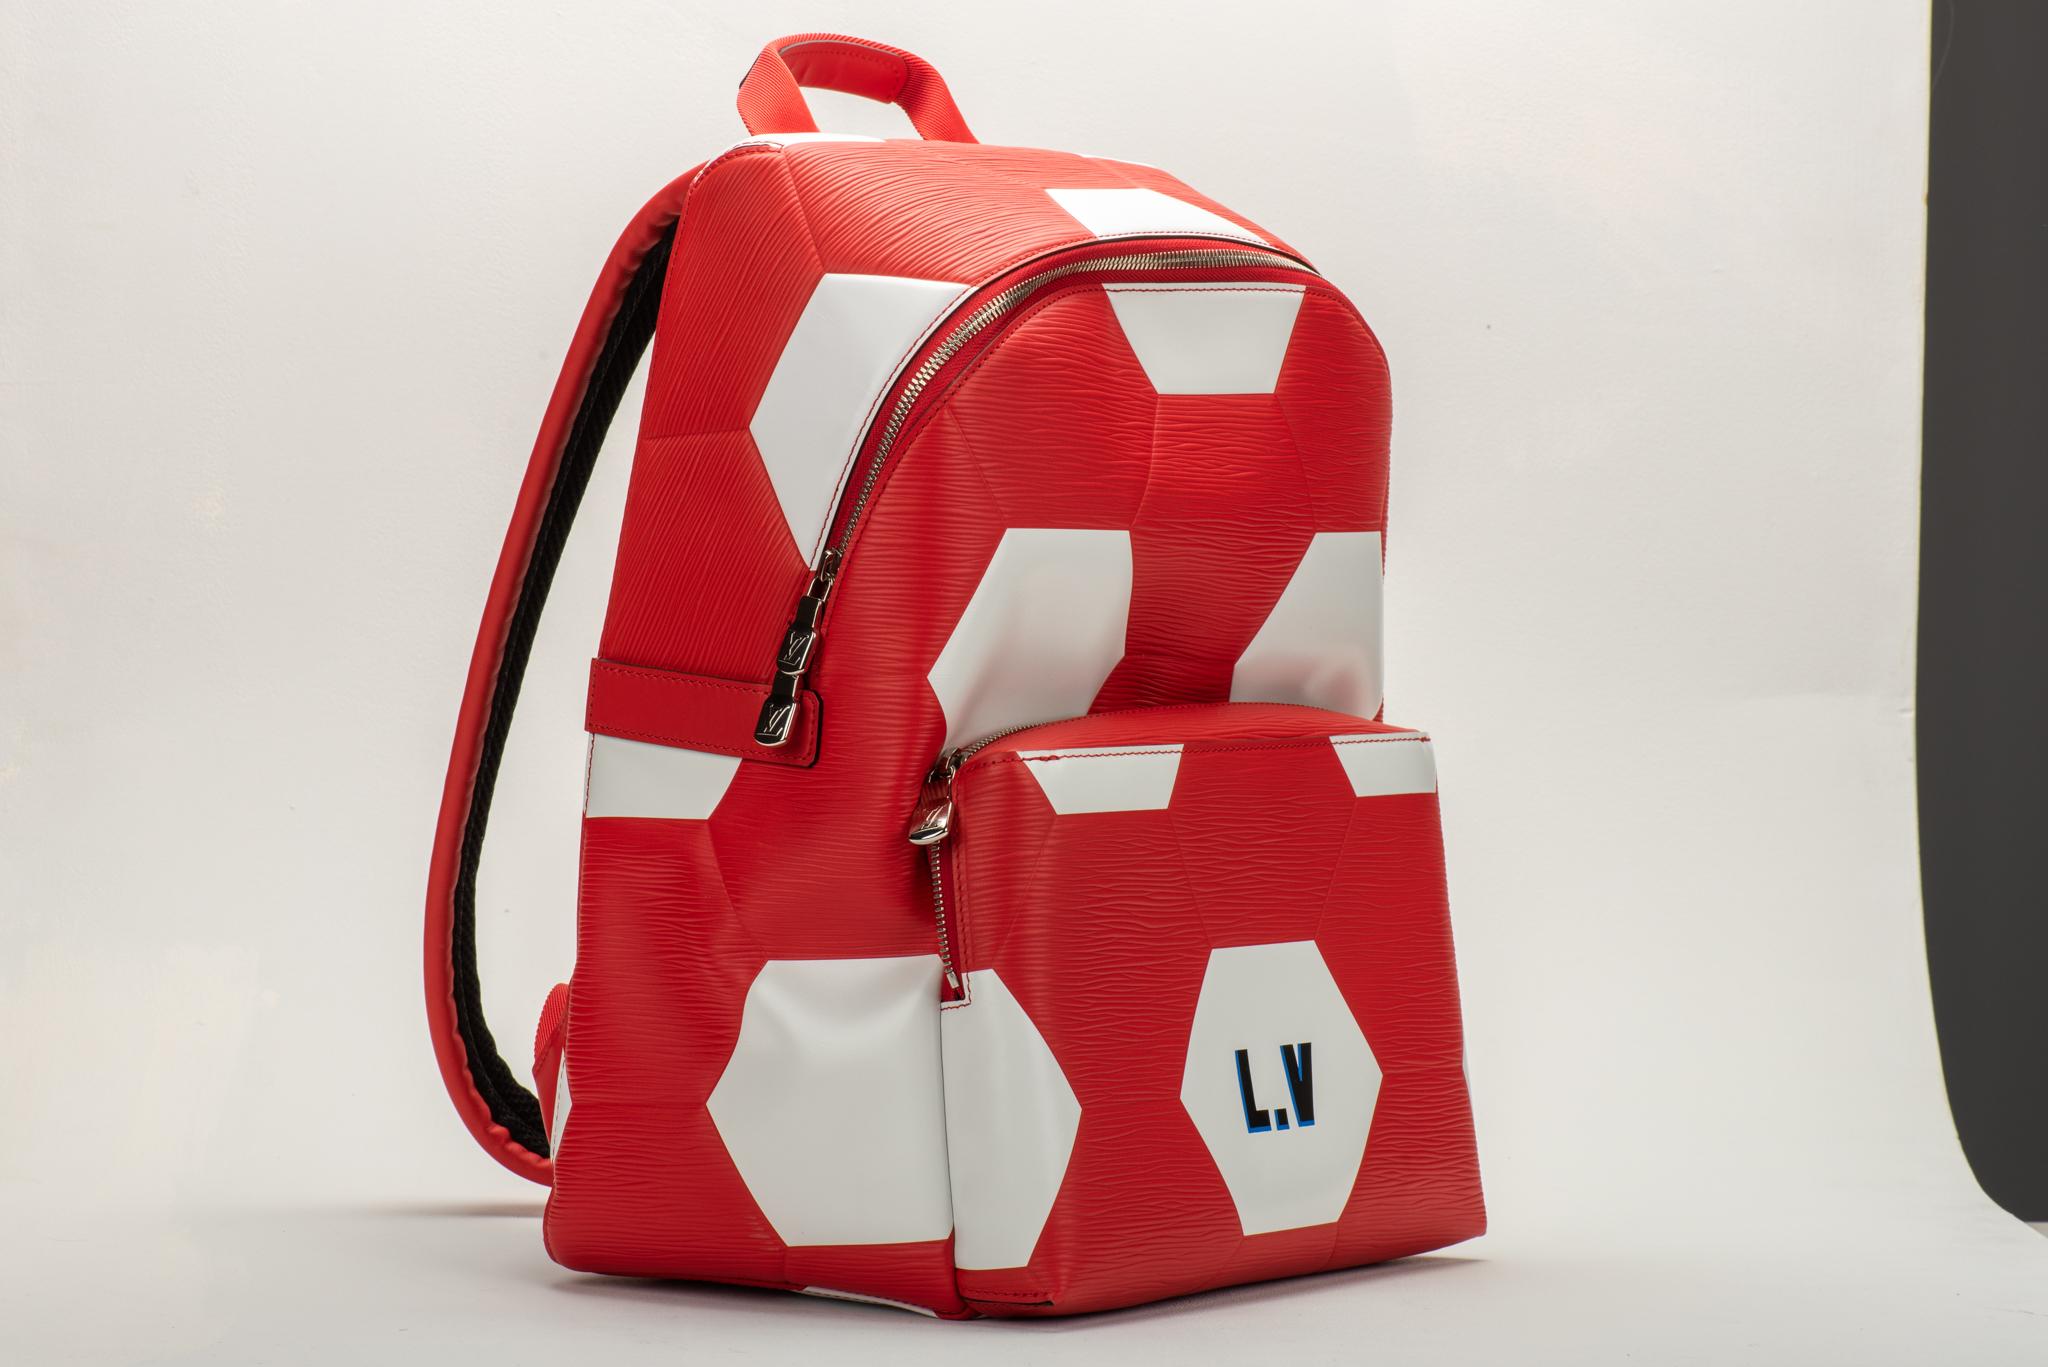 Louis Vuitton SOLD OUT WORLDWIDE FIFA Russia 2018 red and white soccer Apollo backpack. Brand new in box, never worn, comes with hologram identification card. Comes with hologram, dust cover and original box.